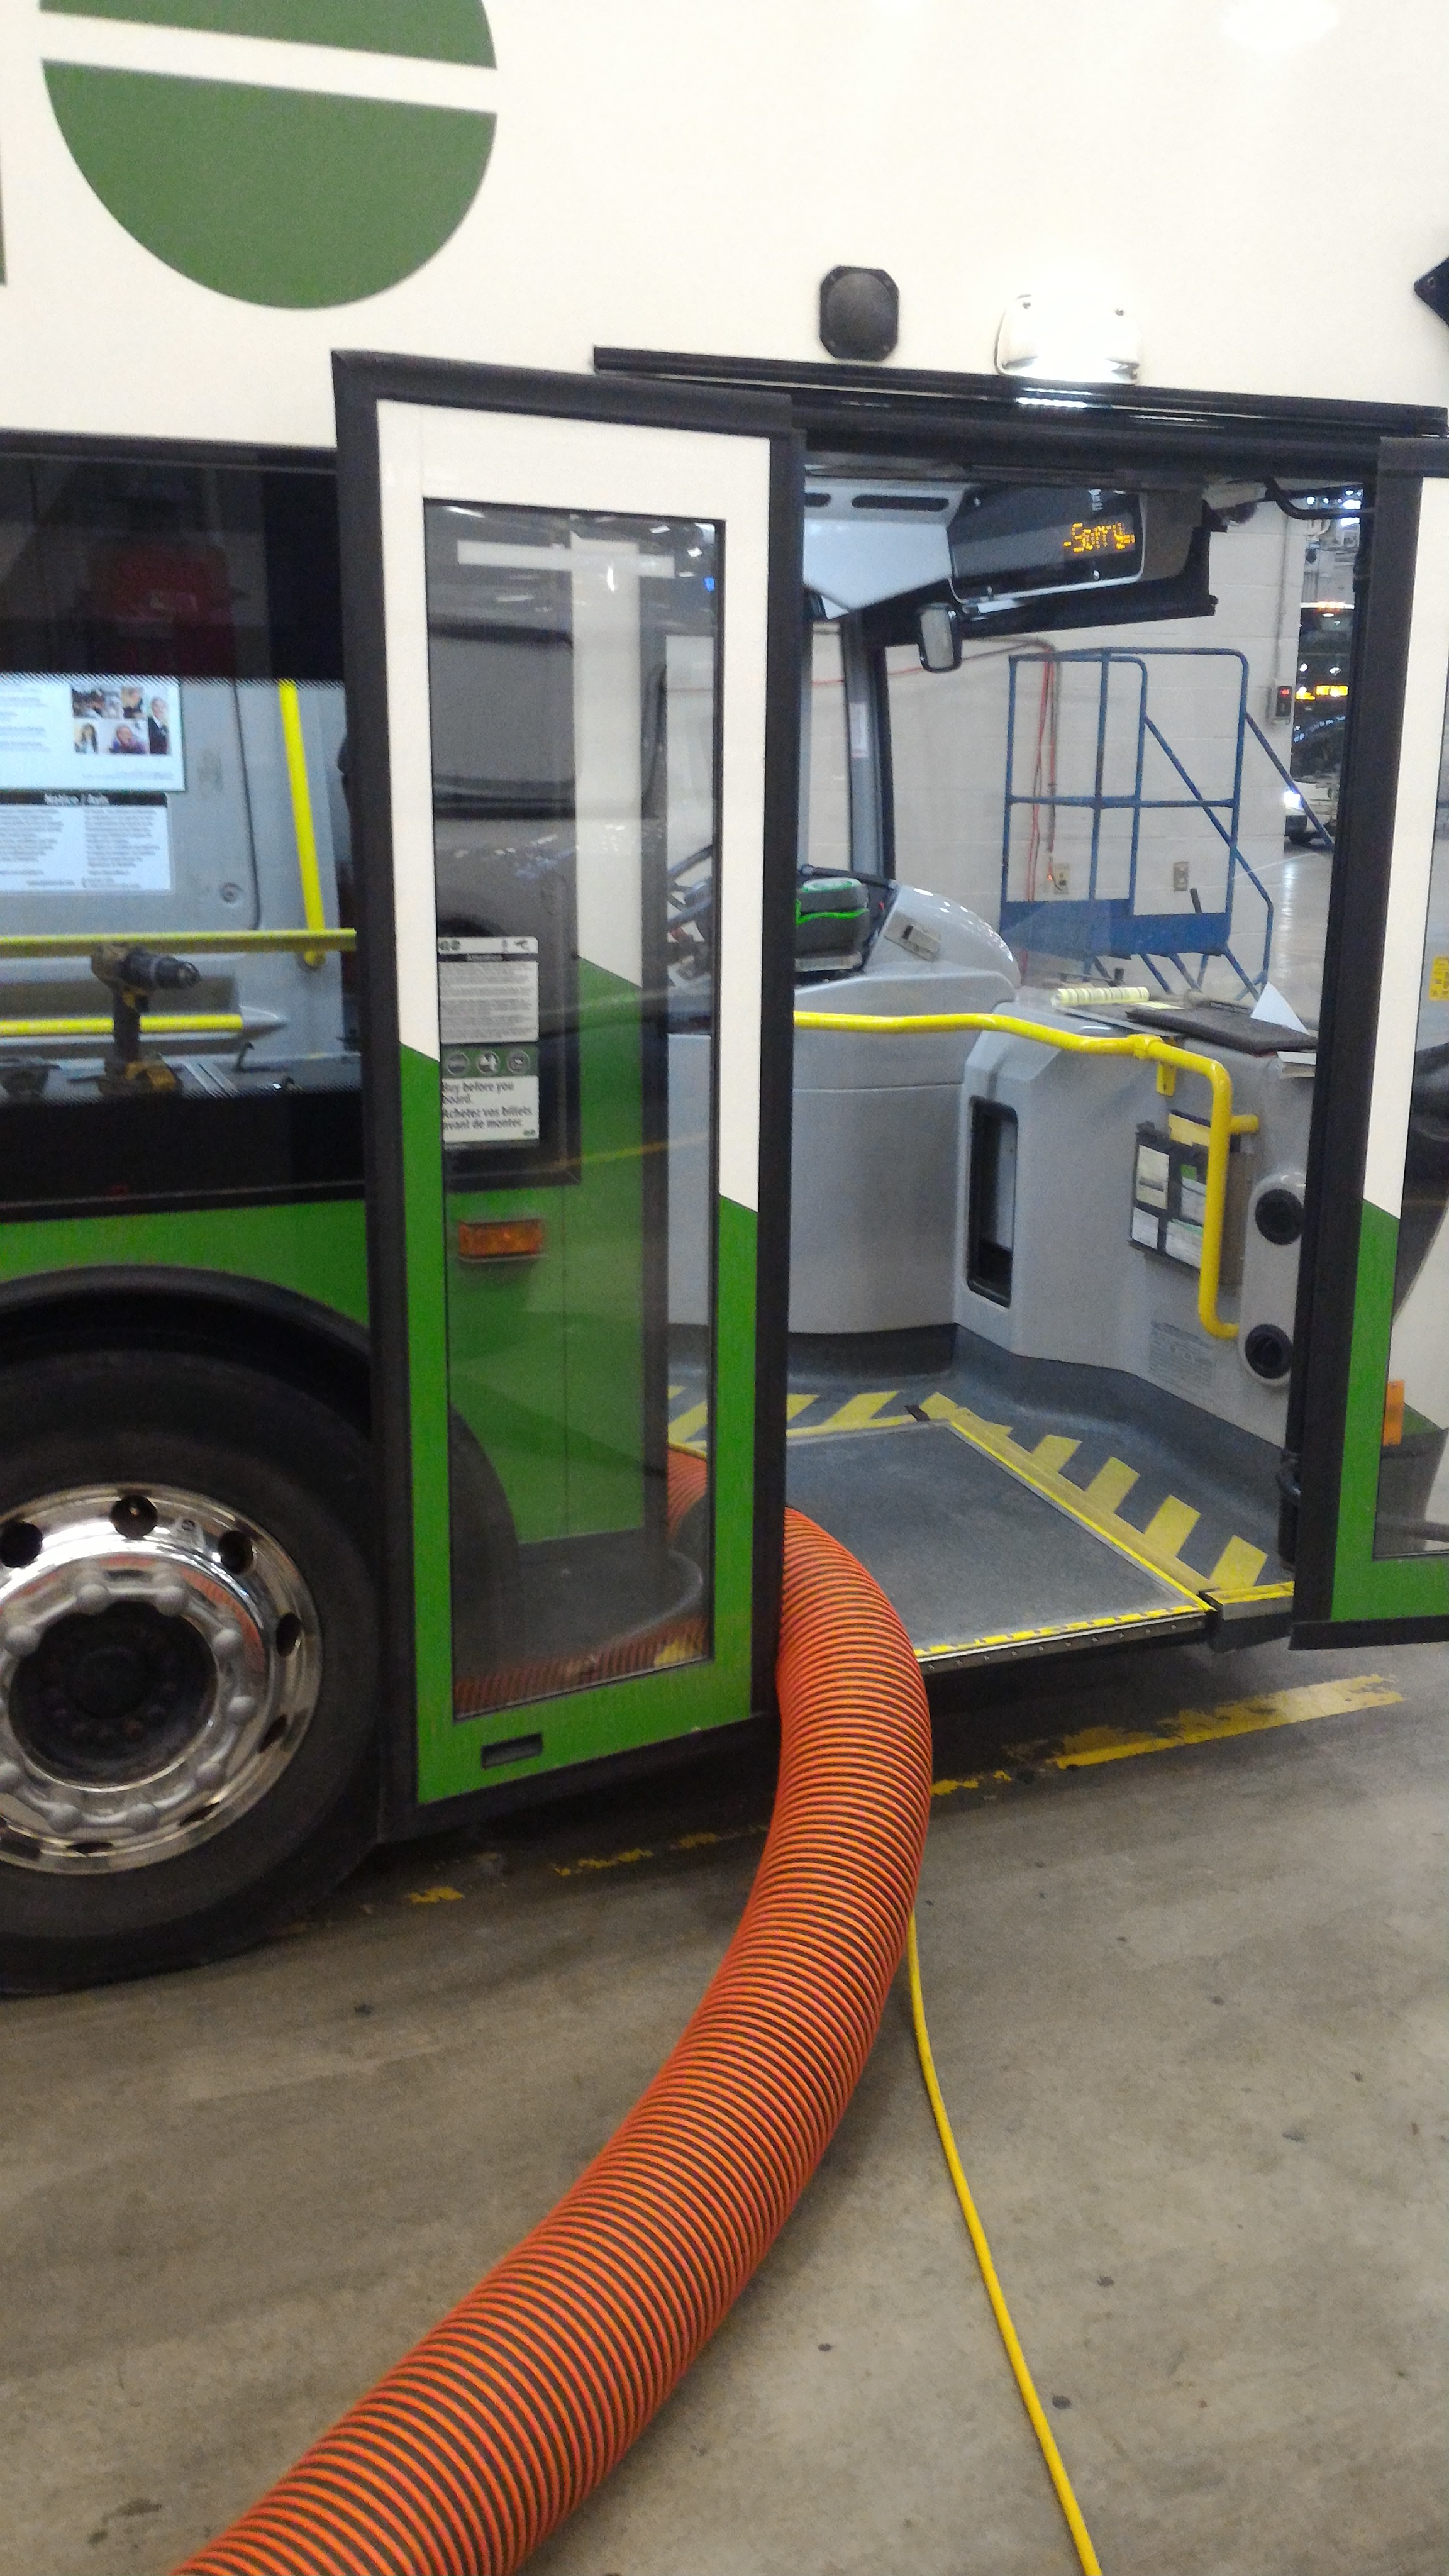 Cleaning performed on a GO transit bus